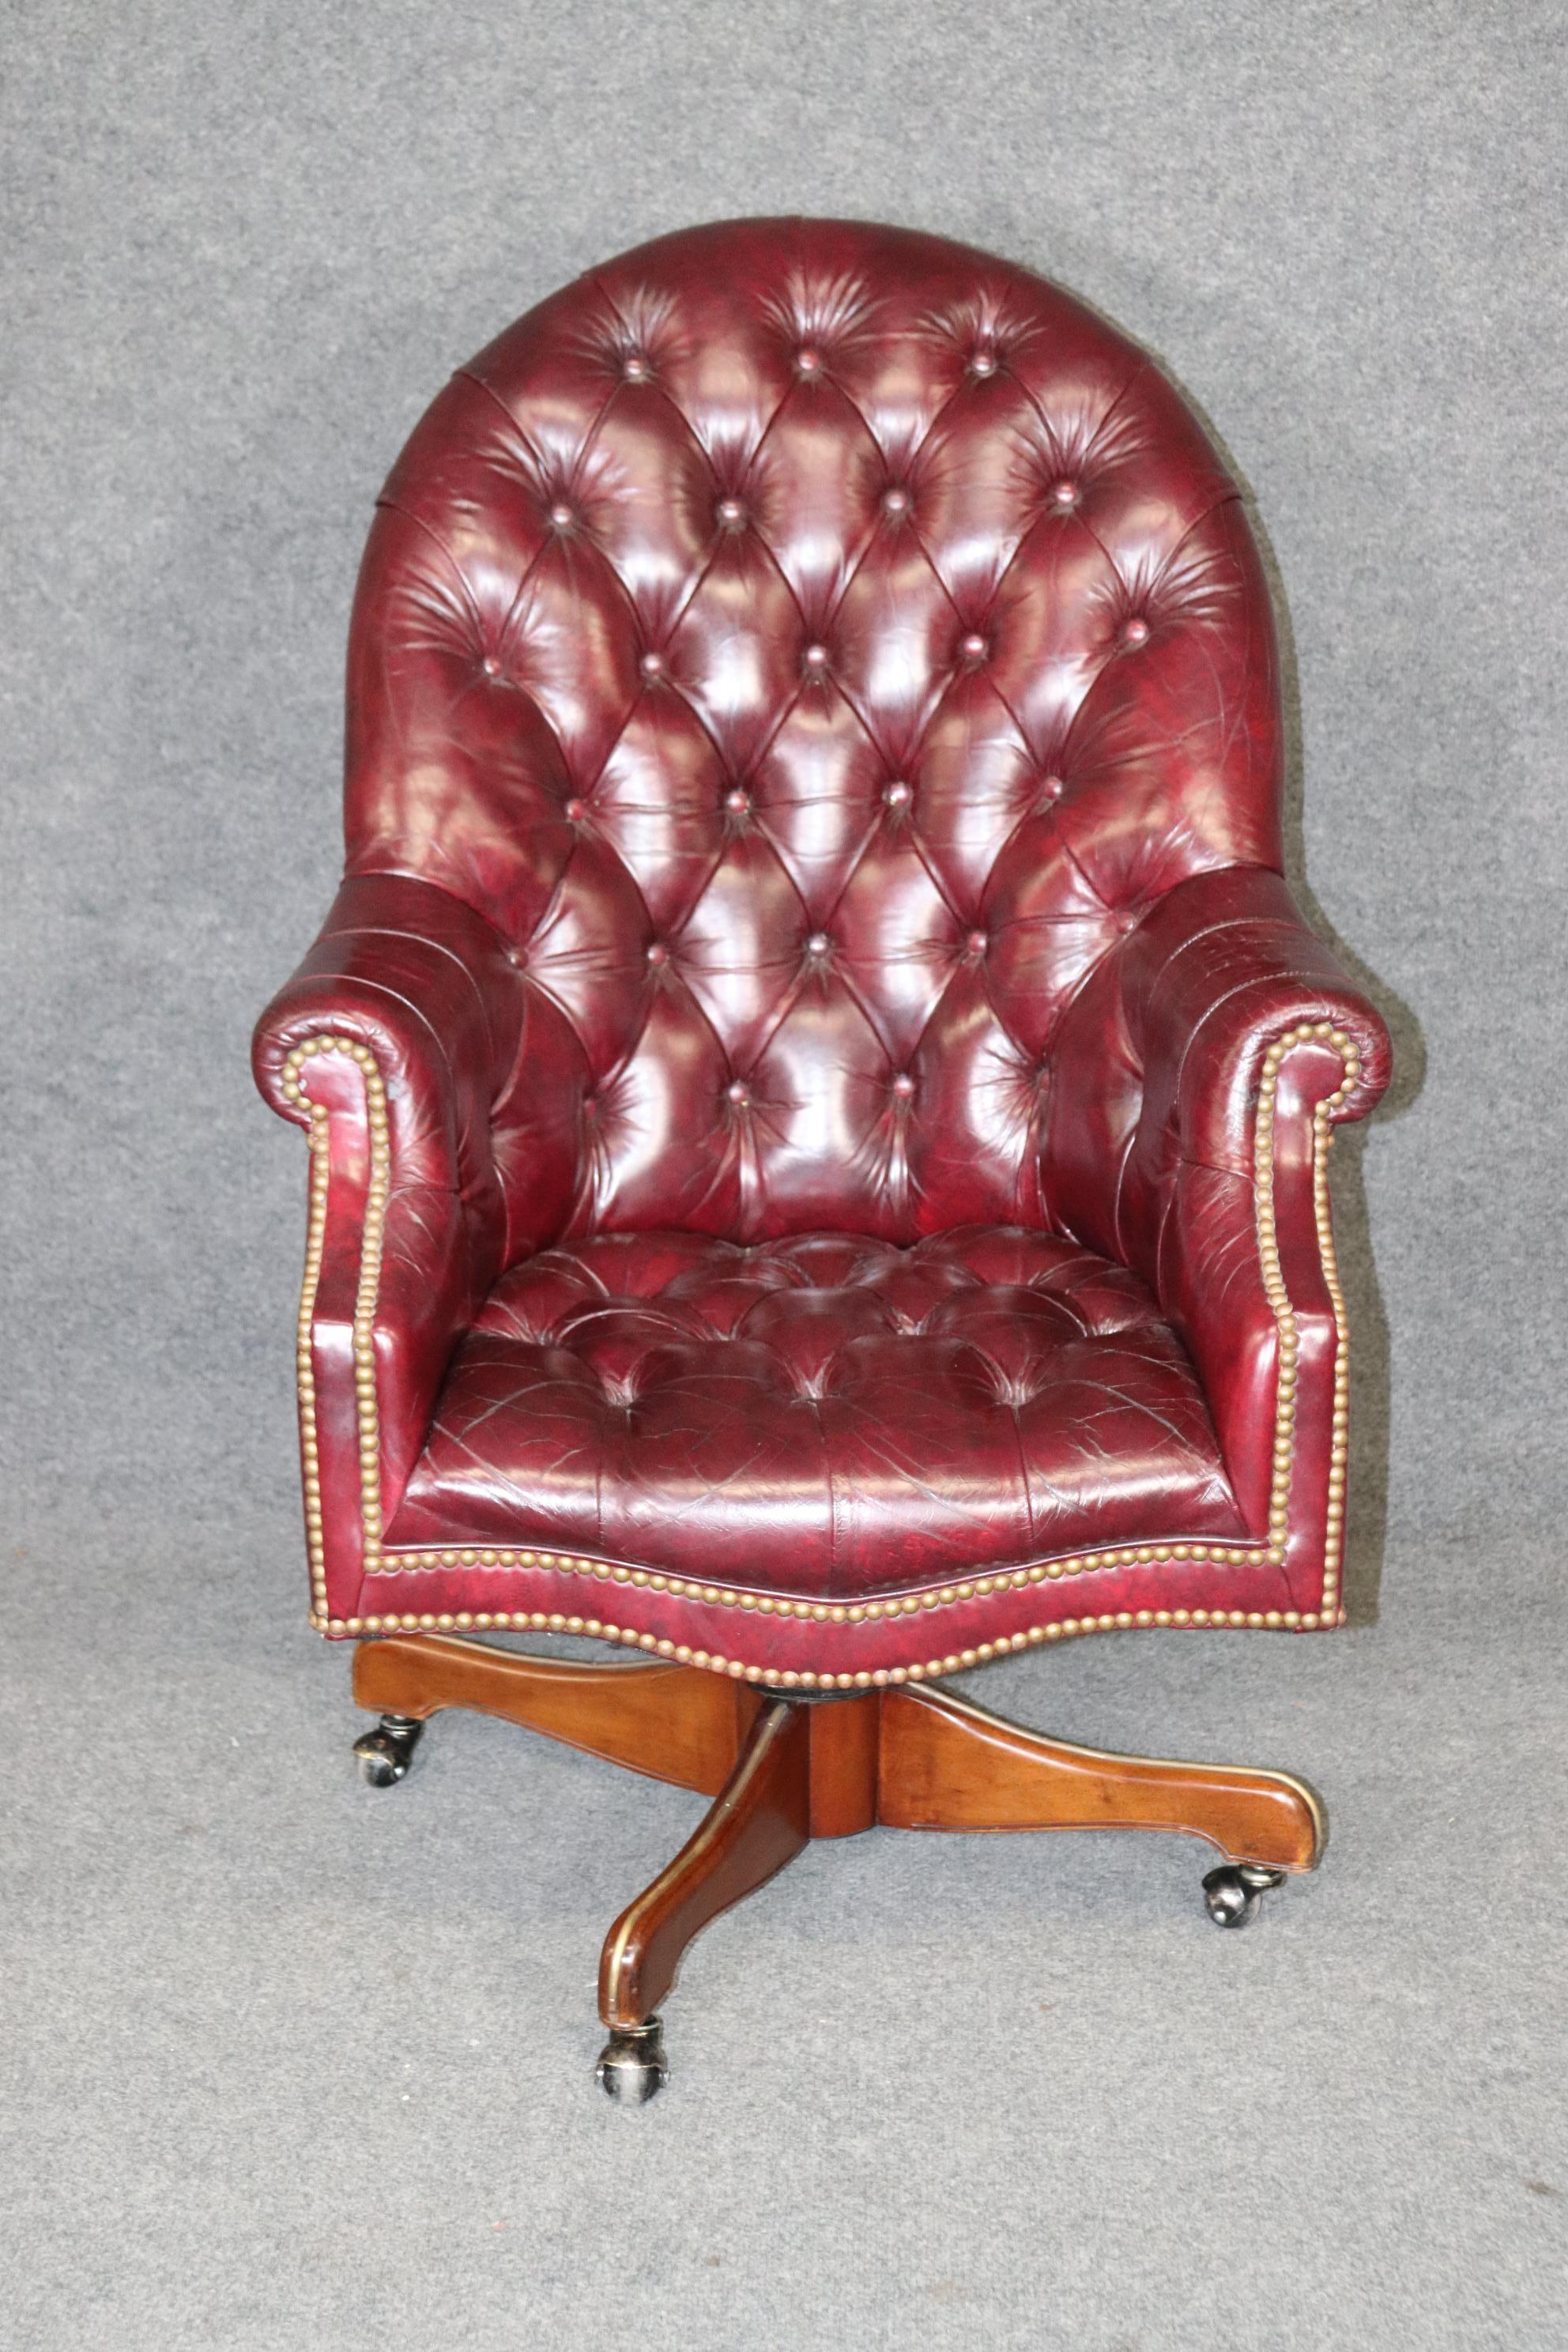 This is a gorgeous burgundy leather vintage 1970s era Chesterfield style office chair that swivels. The leather is in good but used condition so it will show signs of age and wear, creases and areas around the arms with wear. The chair is in